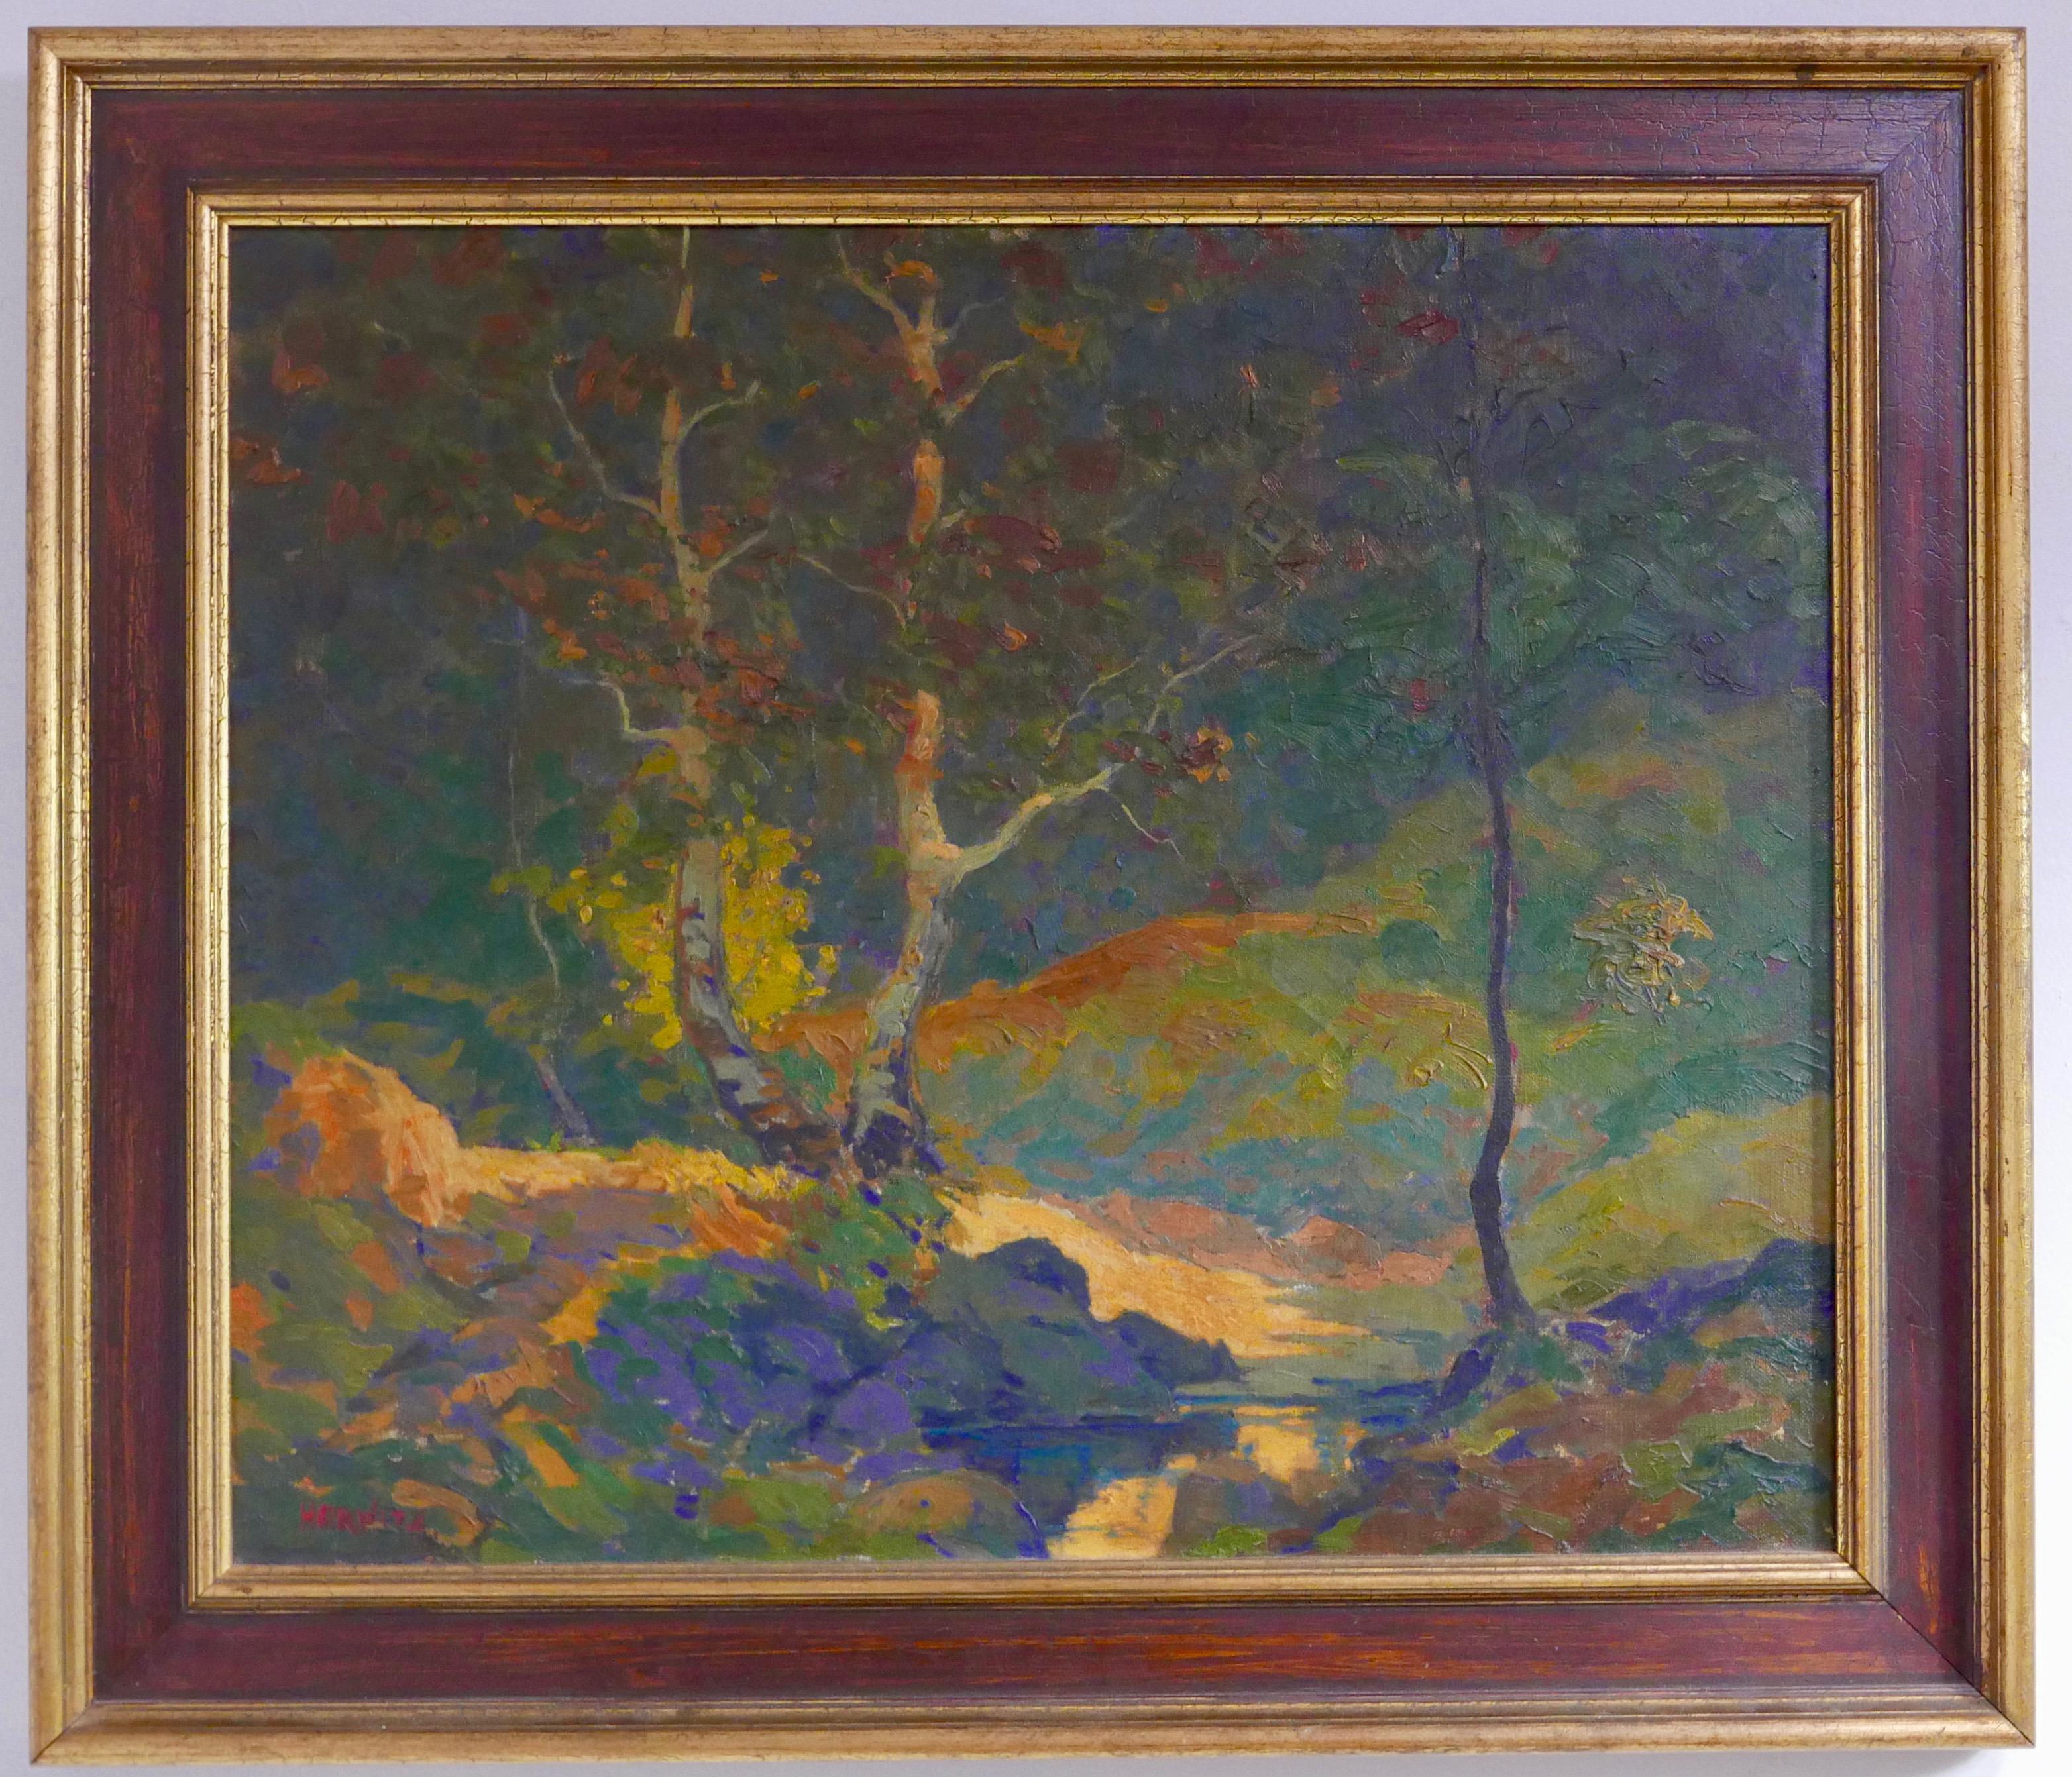 Abstract/ Impressionist Landscape by Russian/American William N. Horwitz, c 1924 7